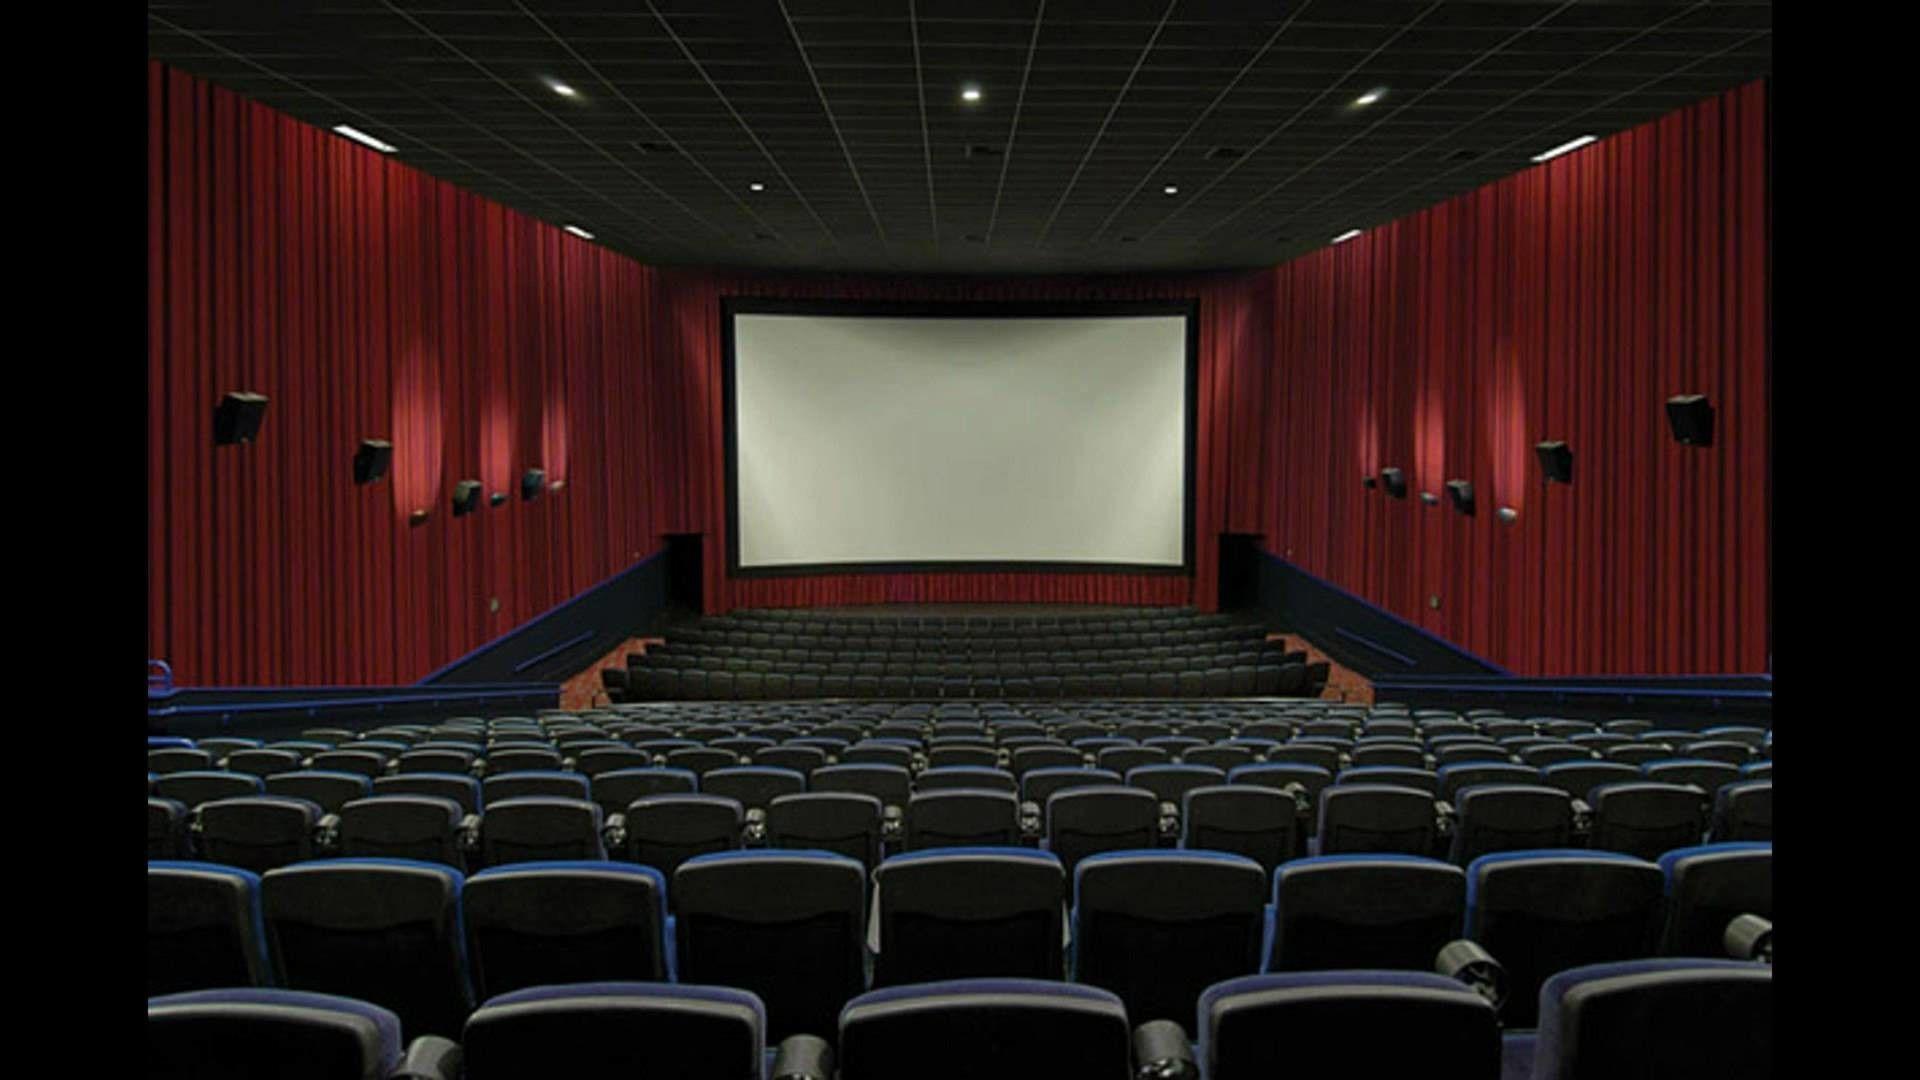 where to download movies that are still in theaters for free